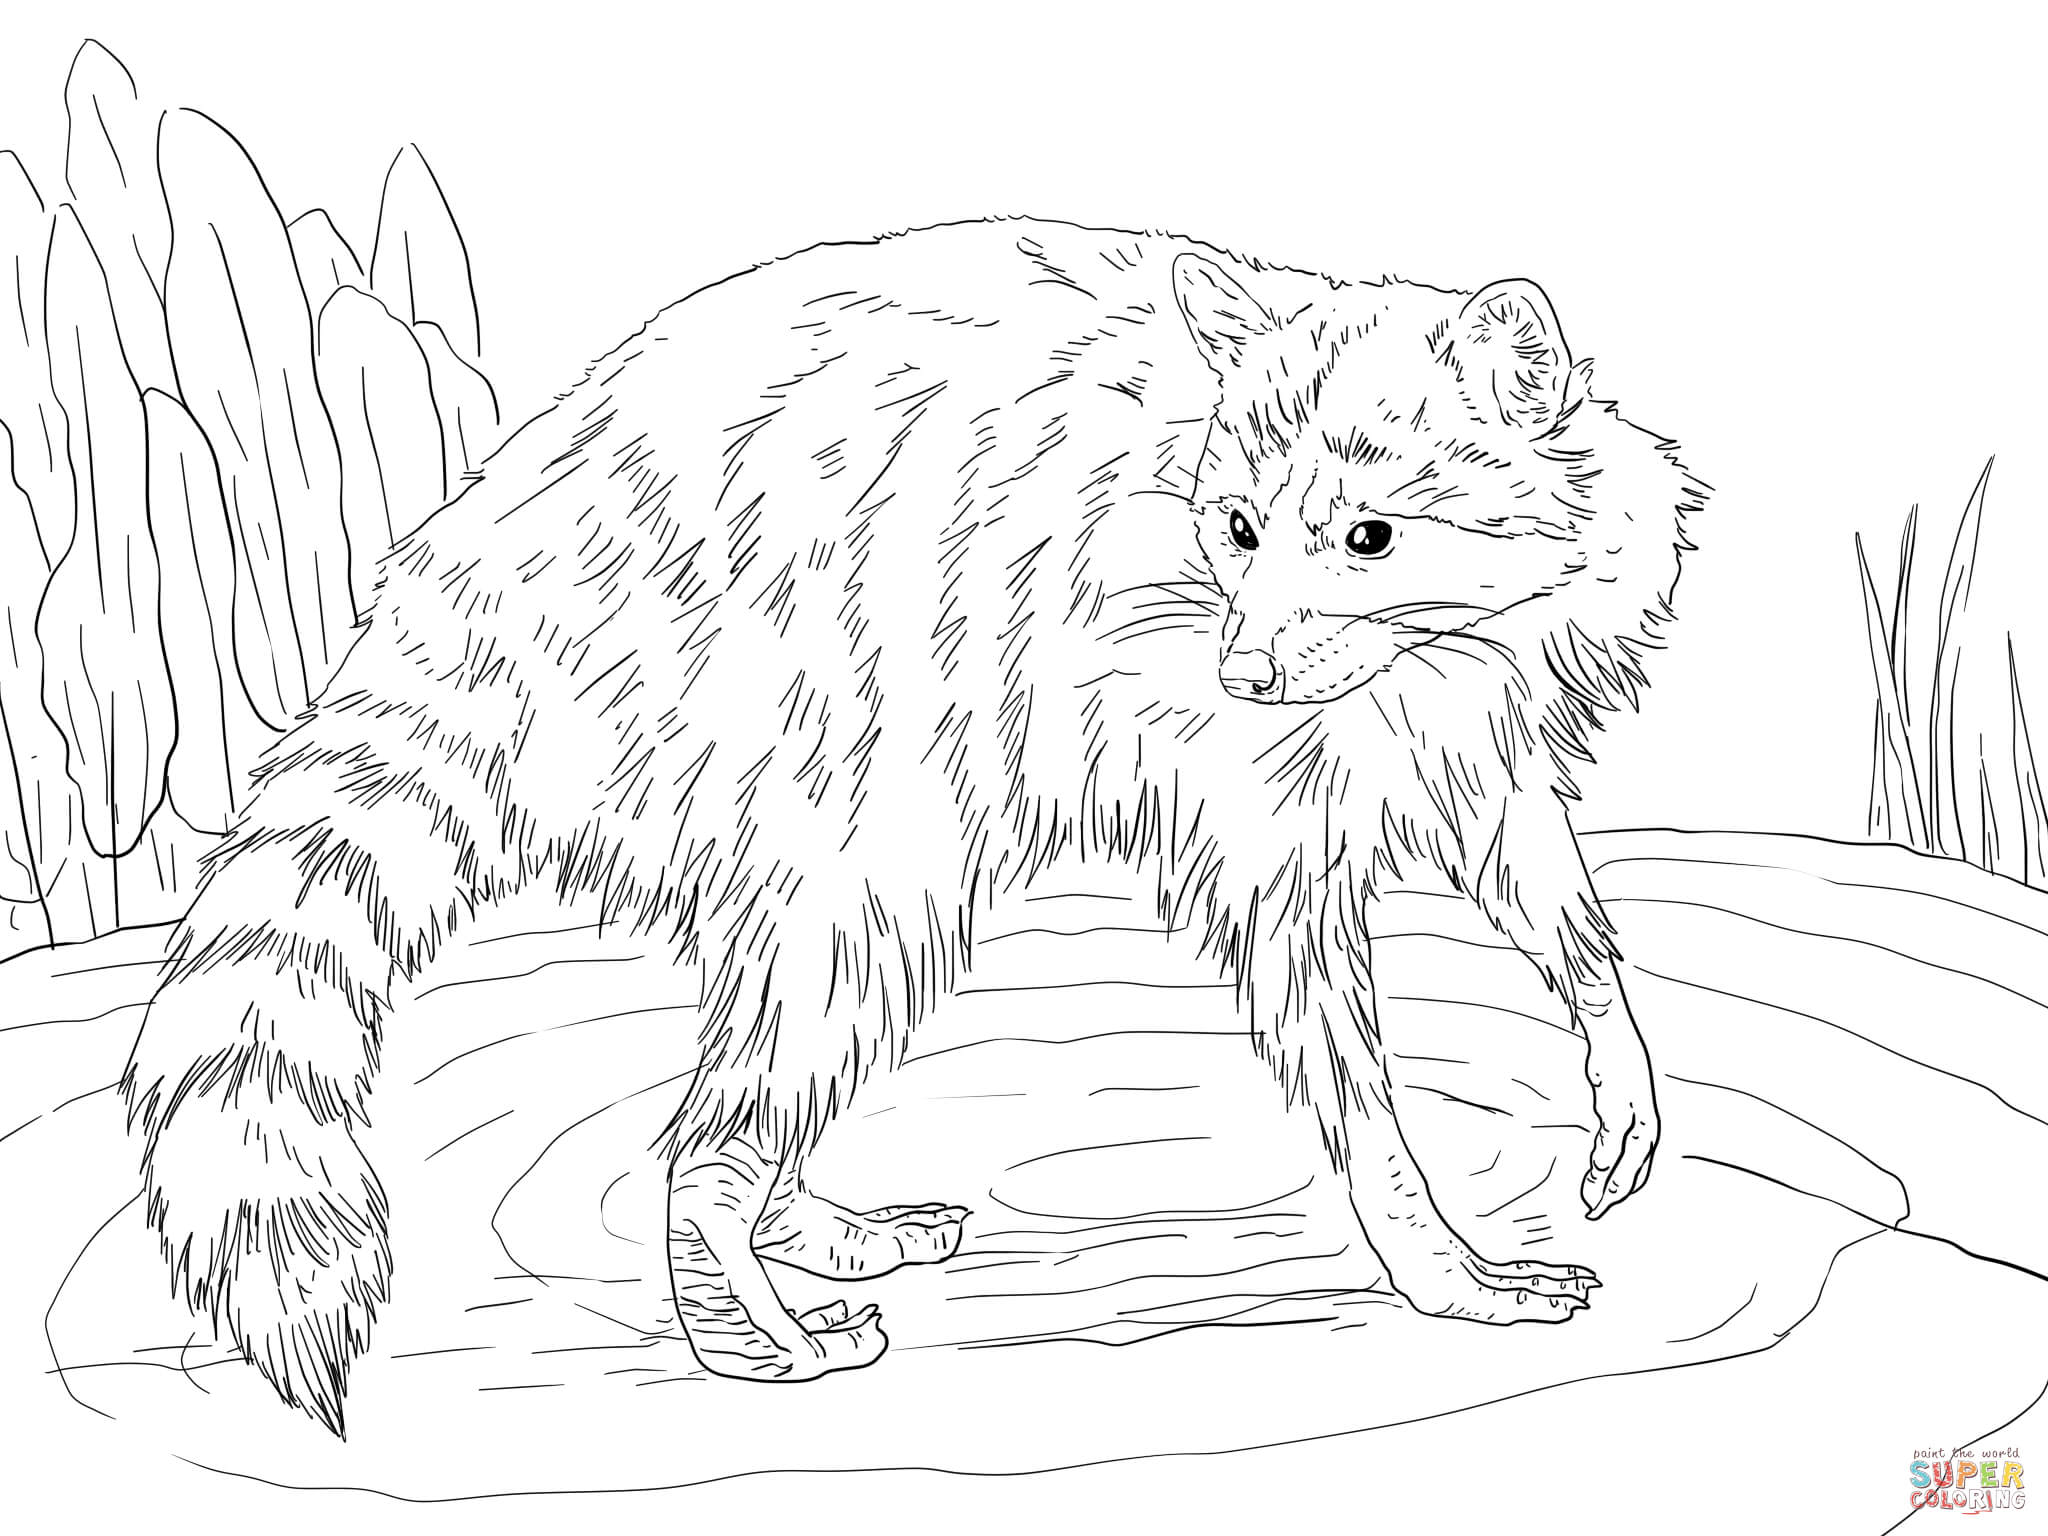 Raccoon coloring page | Free Printable Coloring Pages